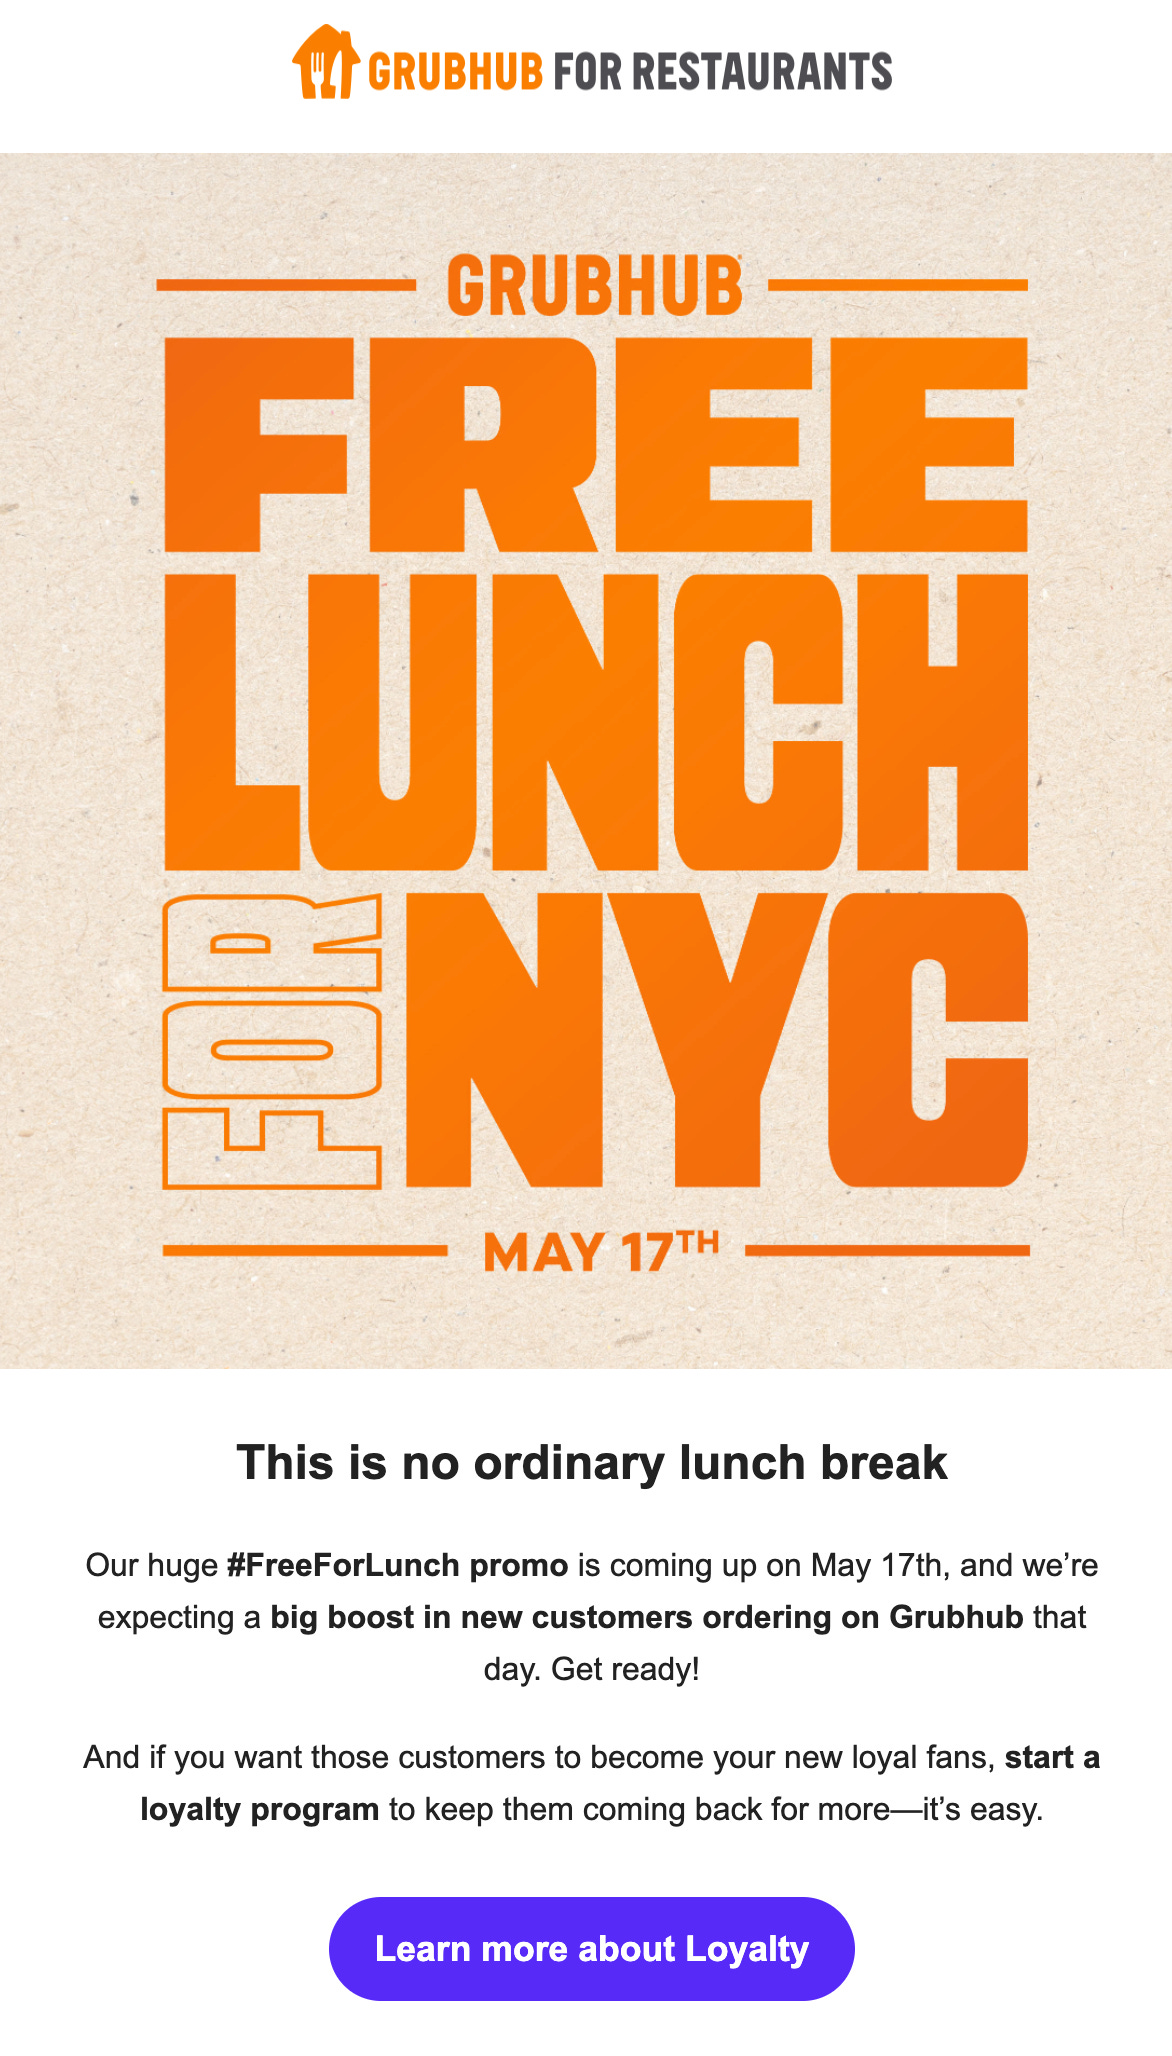 Low-cost lunchtime promotions